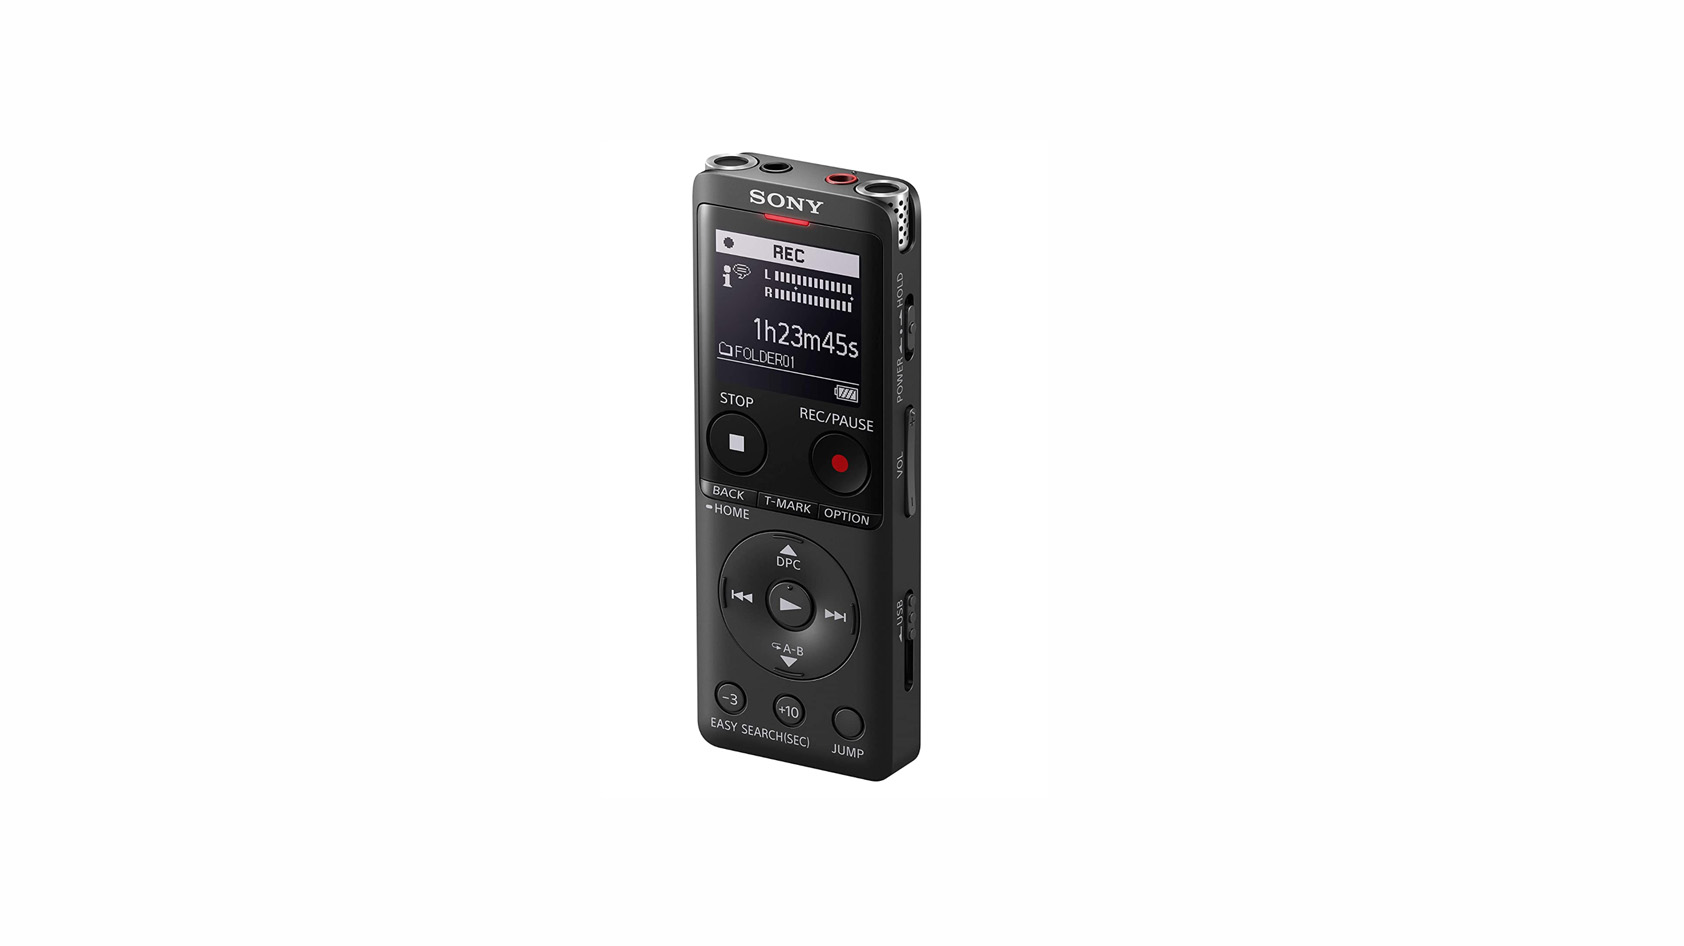 Product image of a Sony ICD-UX570 digital voice recorder on a white background